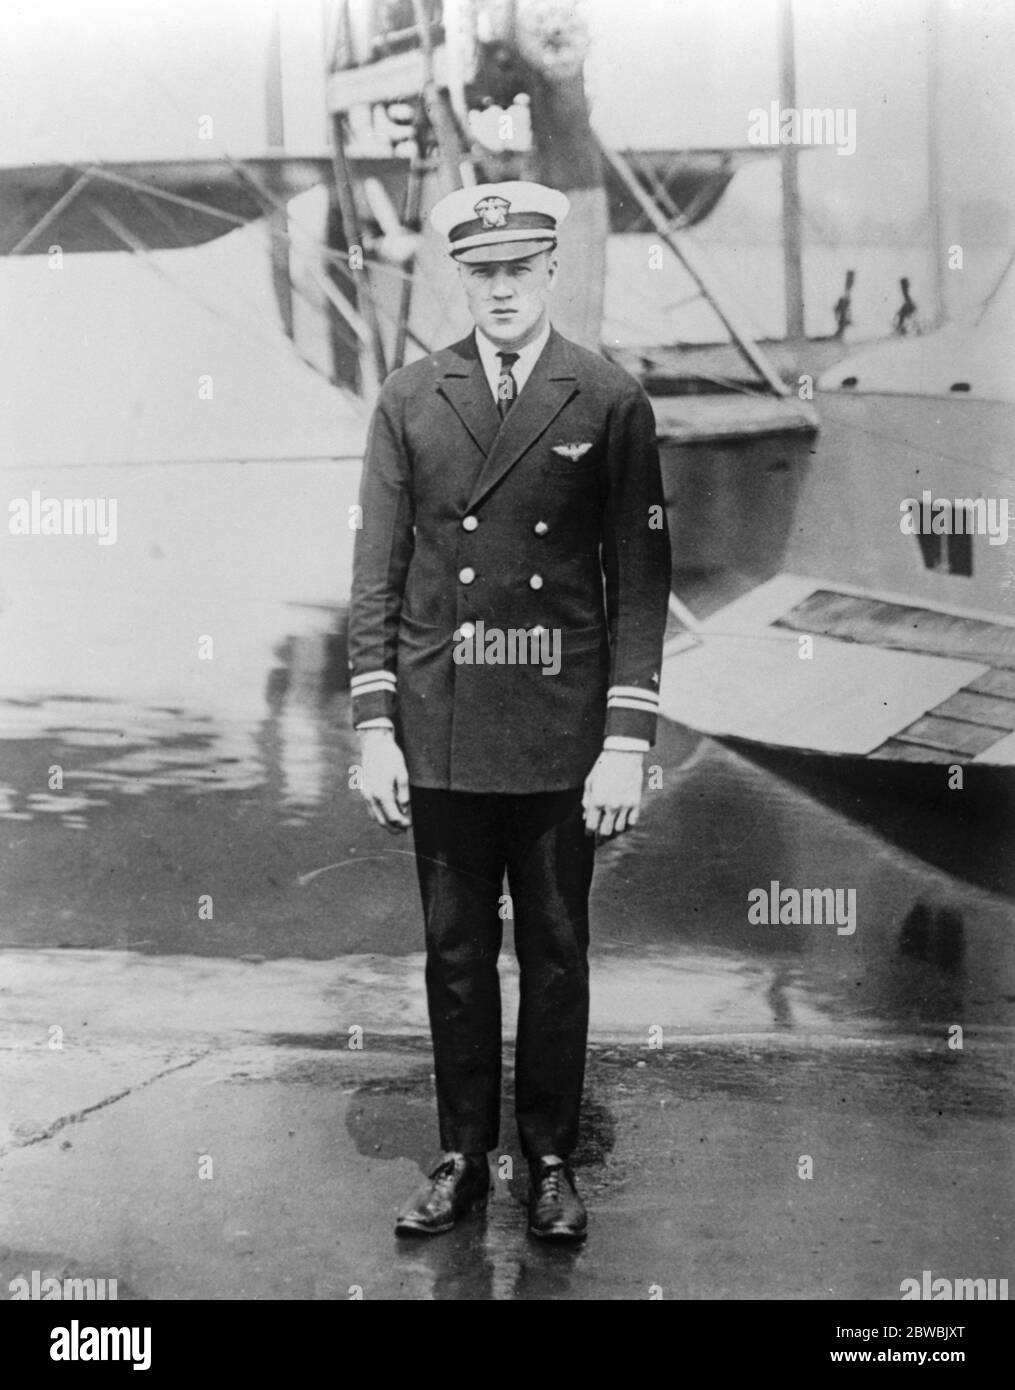 A new flying record was set up at Port Washington , Long Island , U S A by Lieutenant D Rittenhouse . Flying a Curtiss Navy Seaplane , lieutenant Rittenhouse averaged 227 1/ 2 miles per hour during 30 minute flight 28 September 1924 Stock Photo